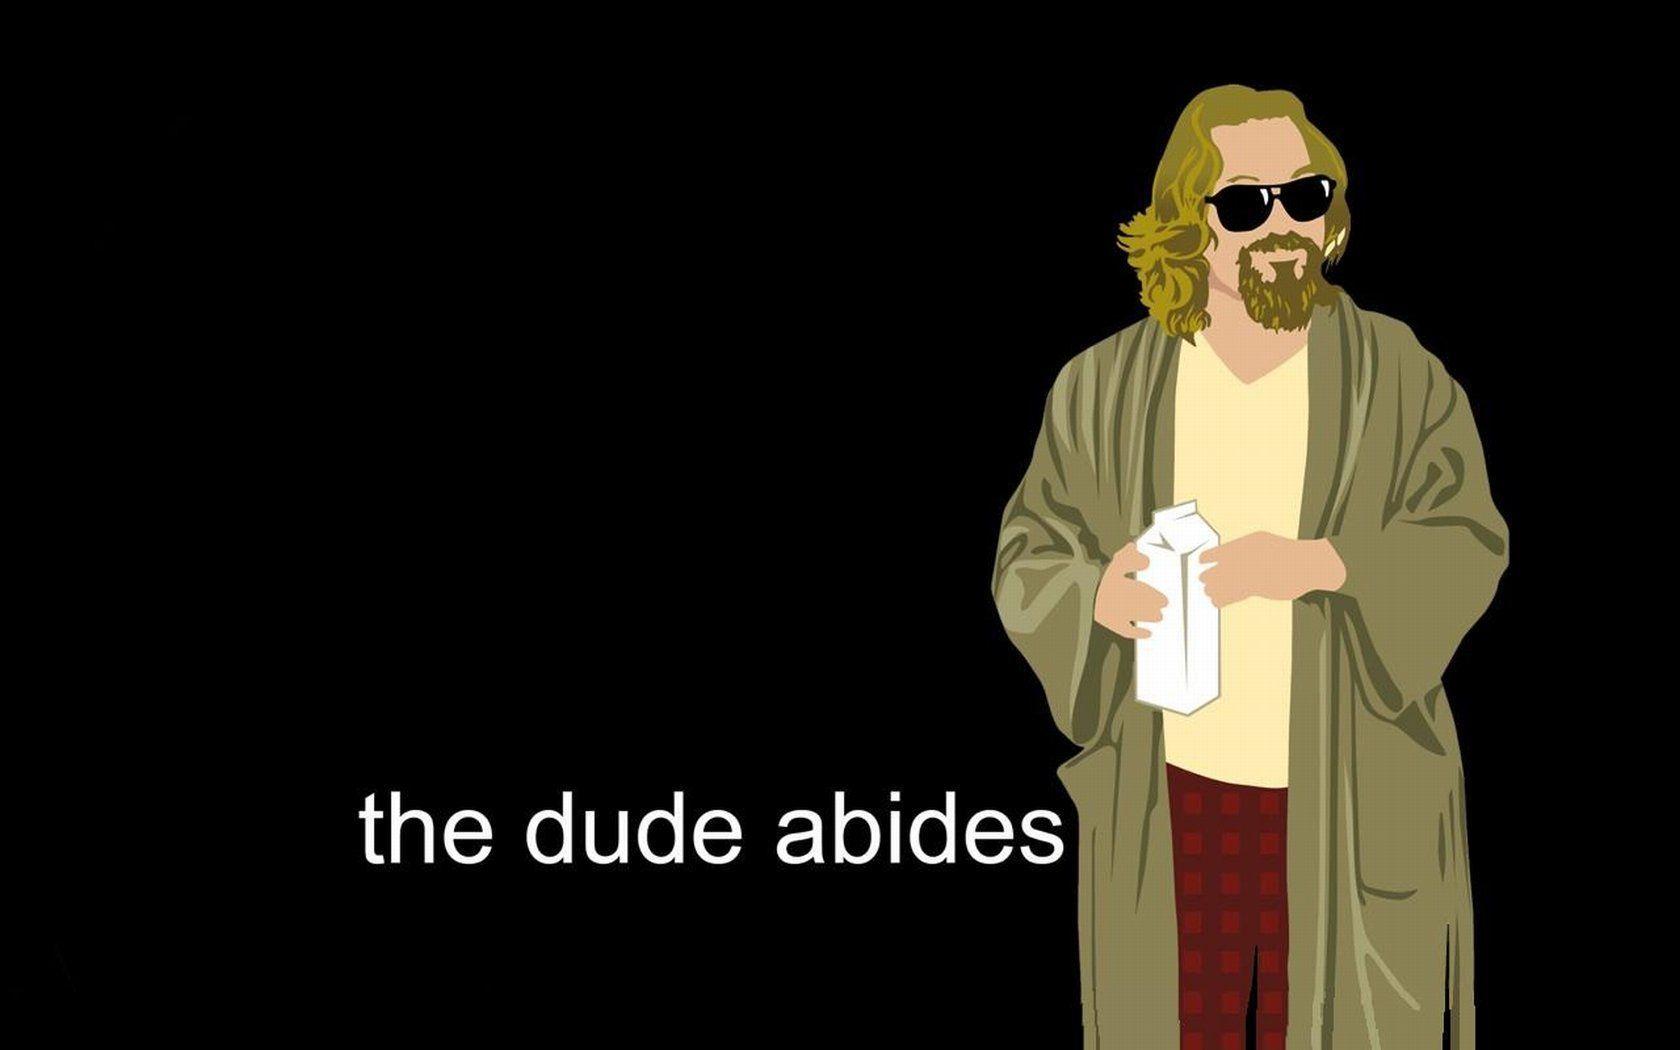 The Dude" Wallpapers.